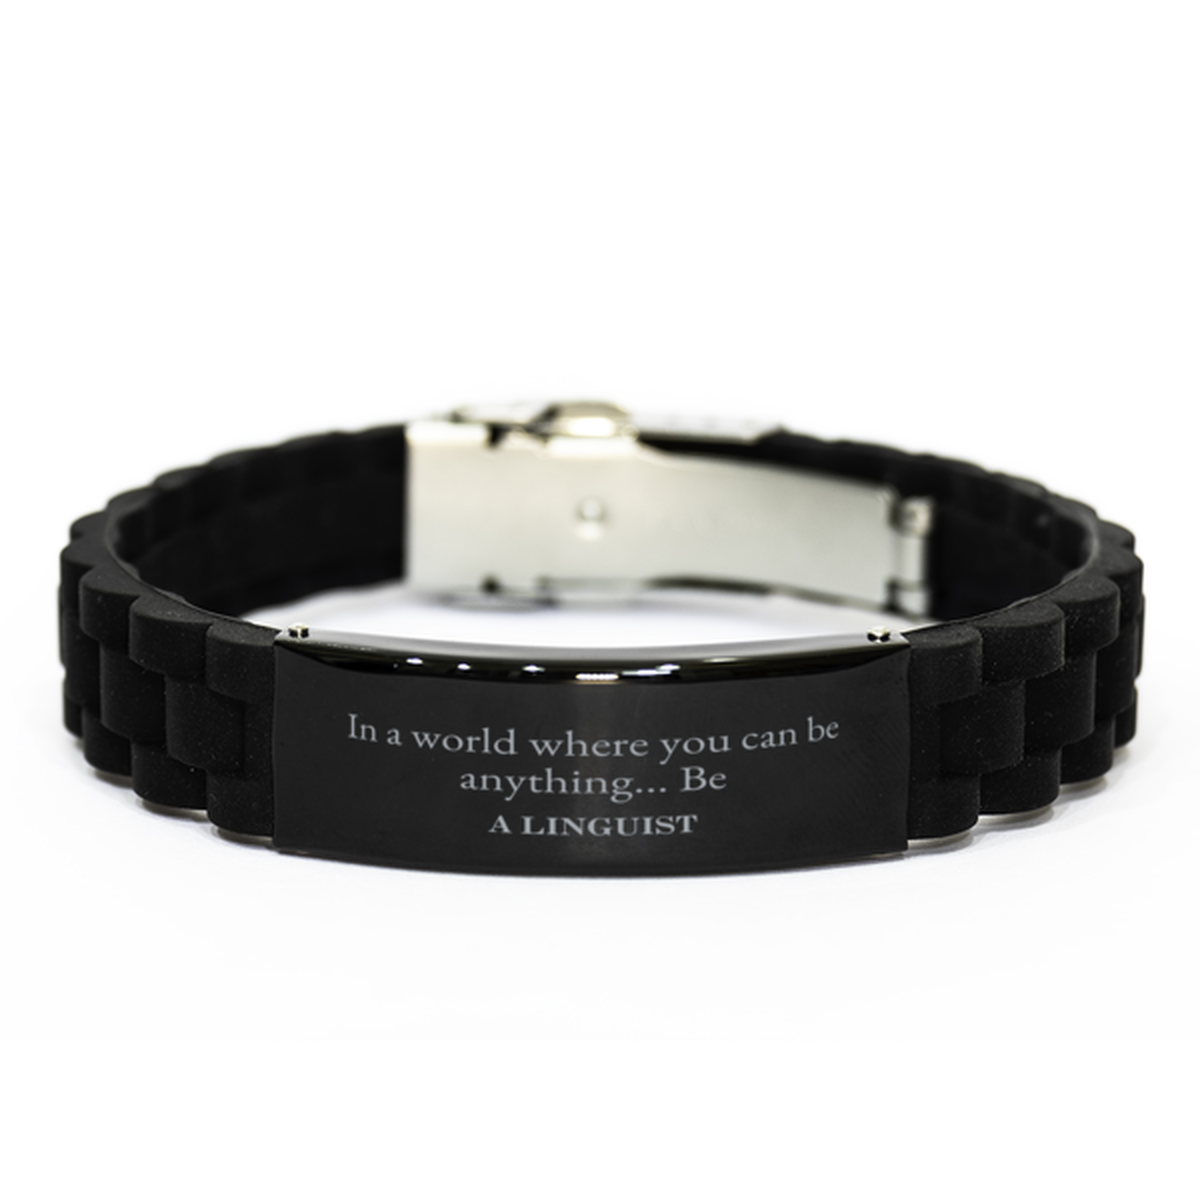 Gifts for Linguist, In a world where you can be anything, Appreciation Birthday Black Glidelock Clasp Bracelet for Men, Women, Friends, Coworkers